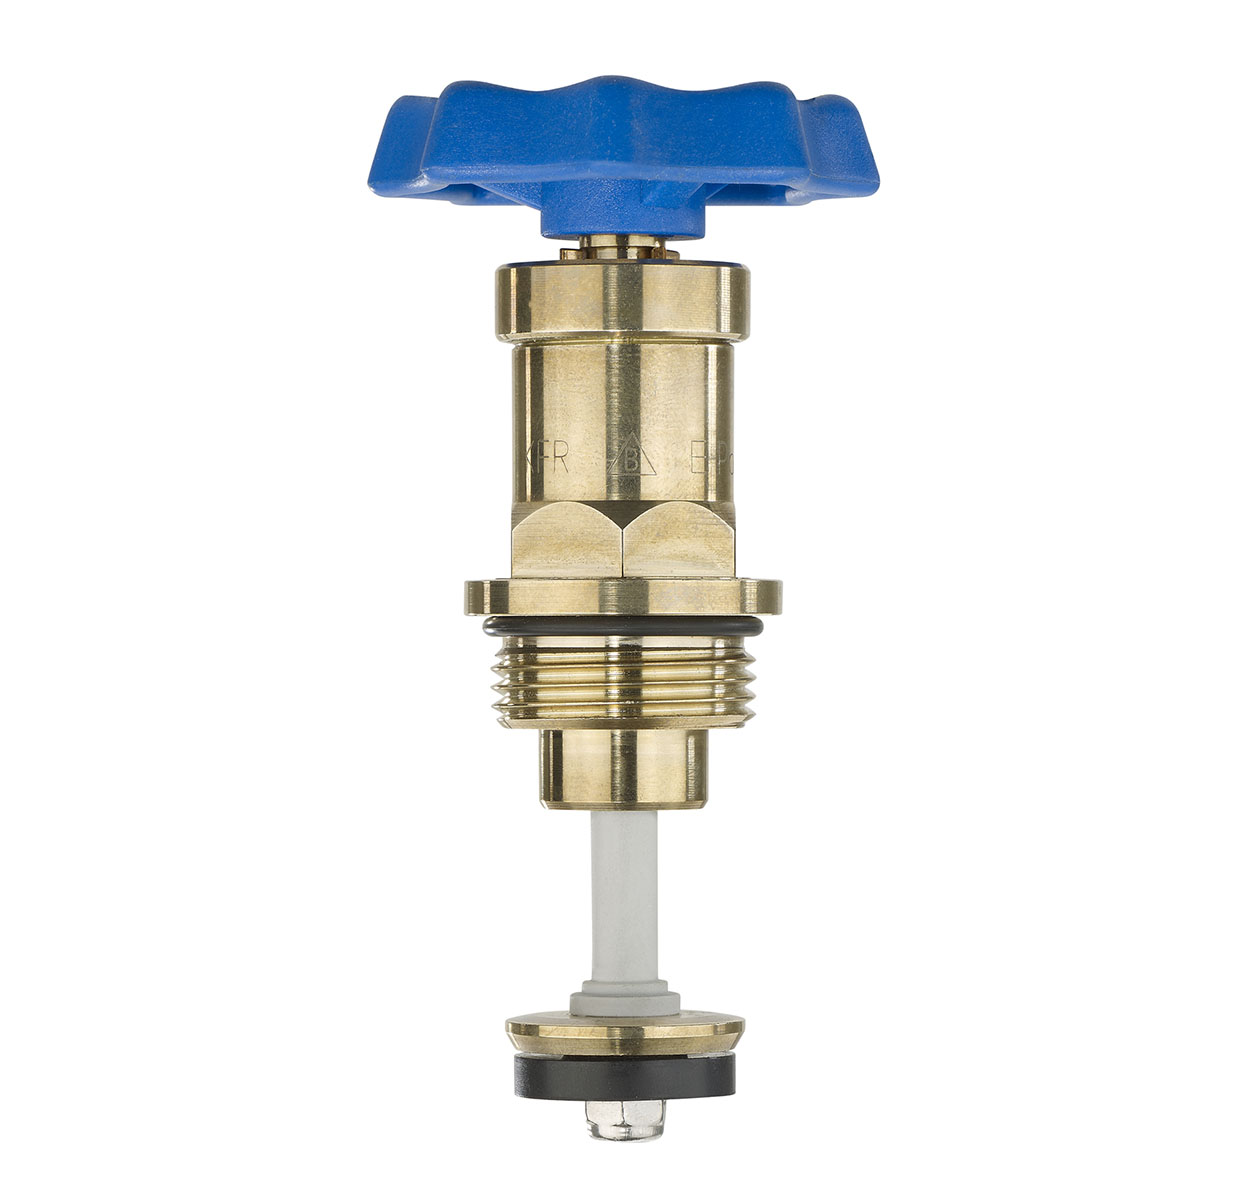 7515400 - long-life ECOCAST upper-part with grease chamber Long-life, for Combined Free-flow and Backflow-preventer valves